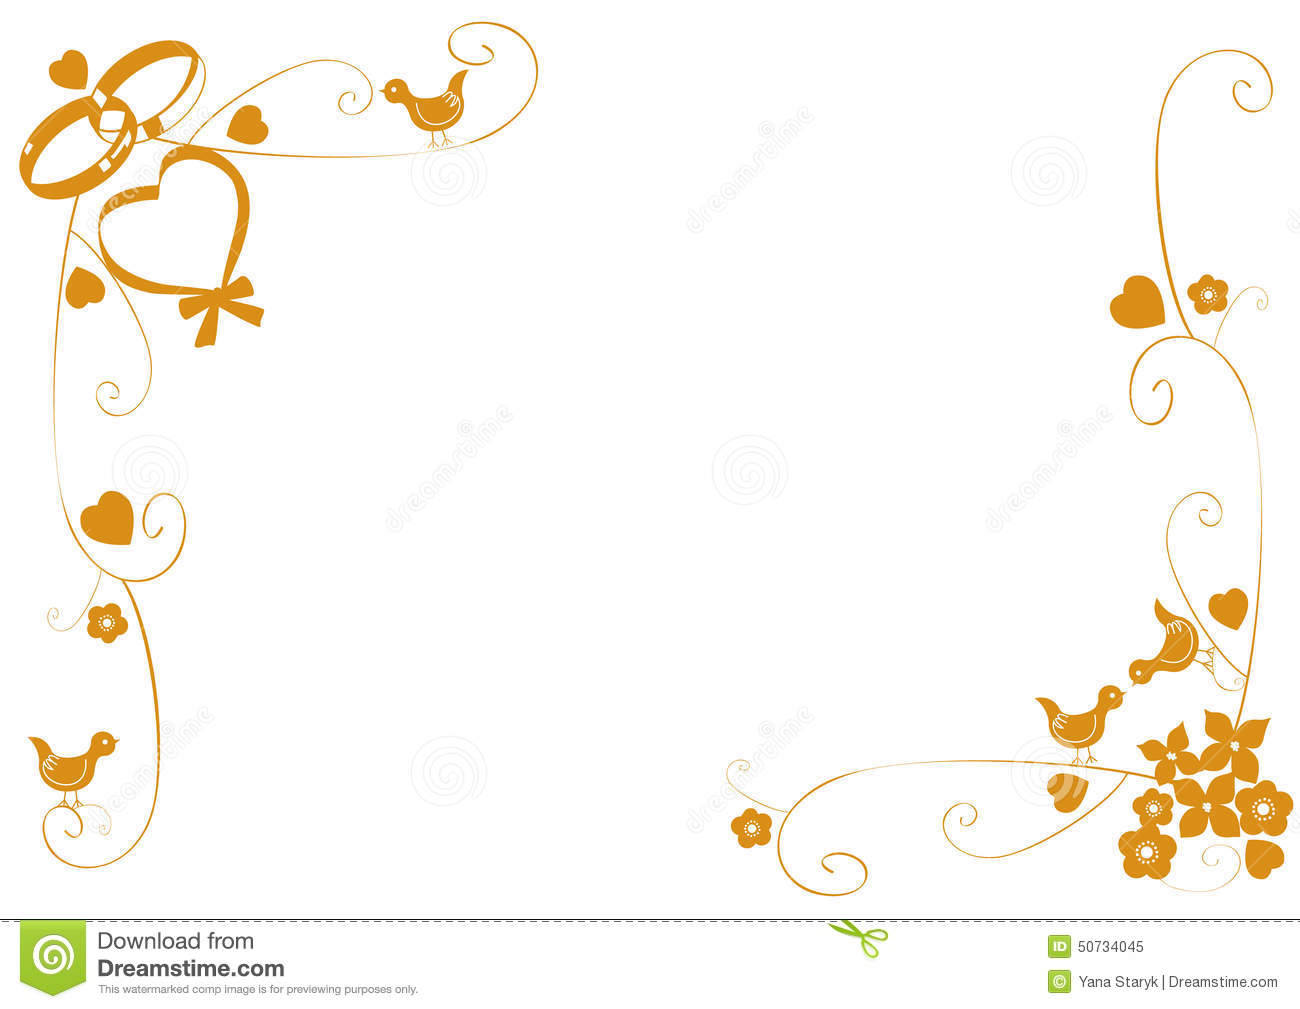 Wedding ring border clipart 3 » Clipart Station.